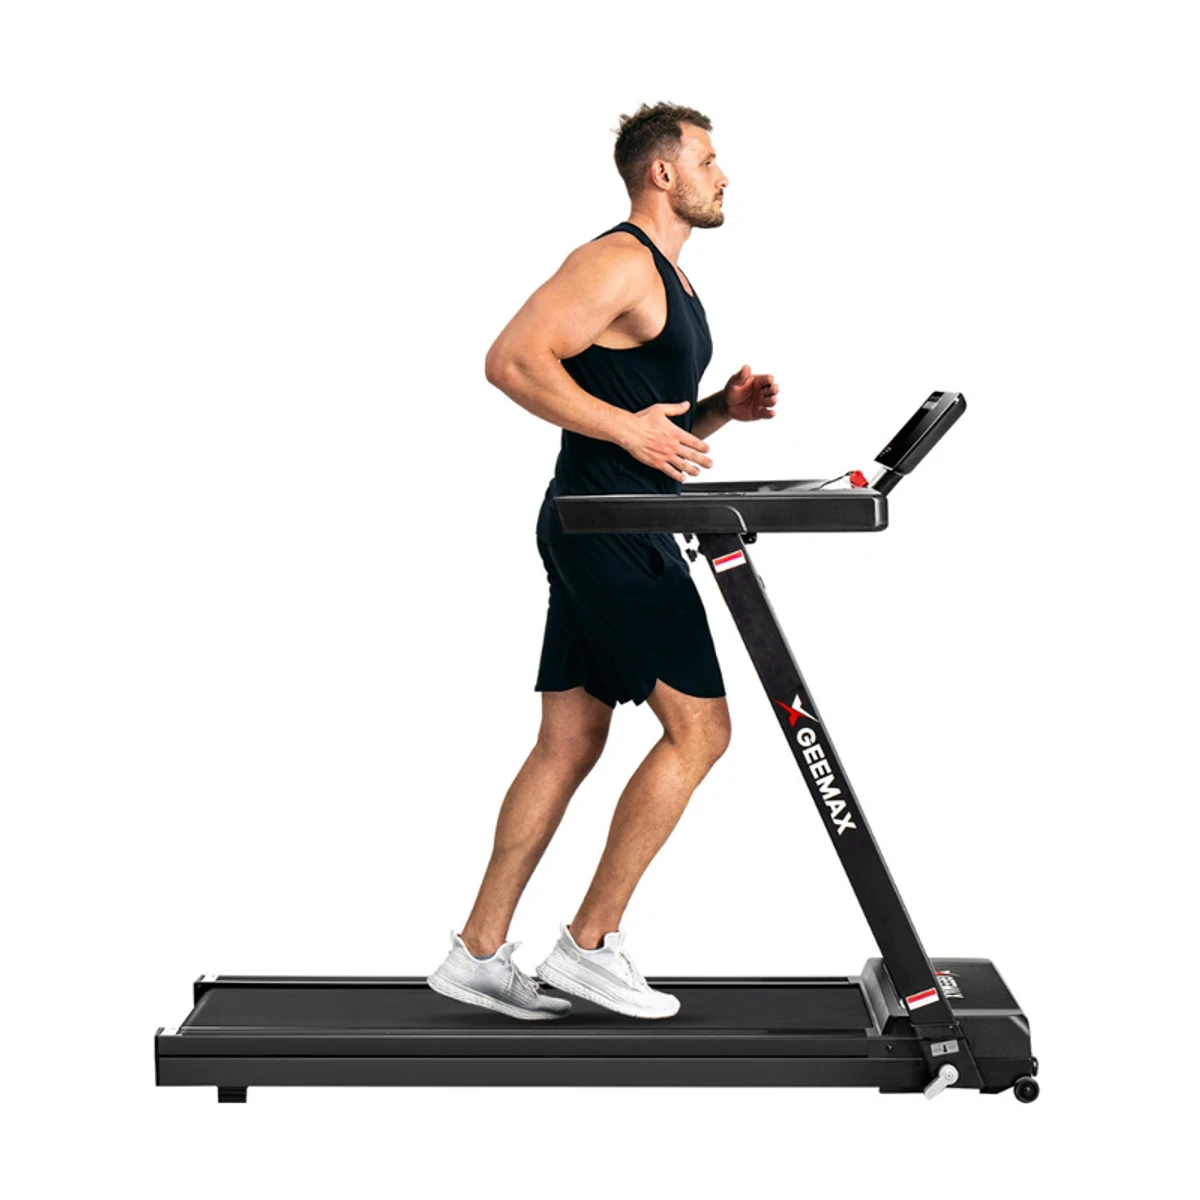 Geemax S1 Professional Folding Treadmill 2.5 HP Power 16KM Max Speed Unlock 135KG Weight Capacity 100% Installation-free with 24-inch LED Smart Display for Home Gym Workouts